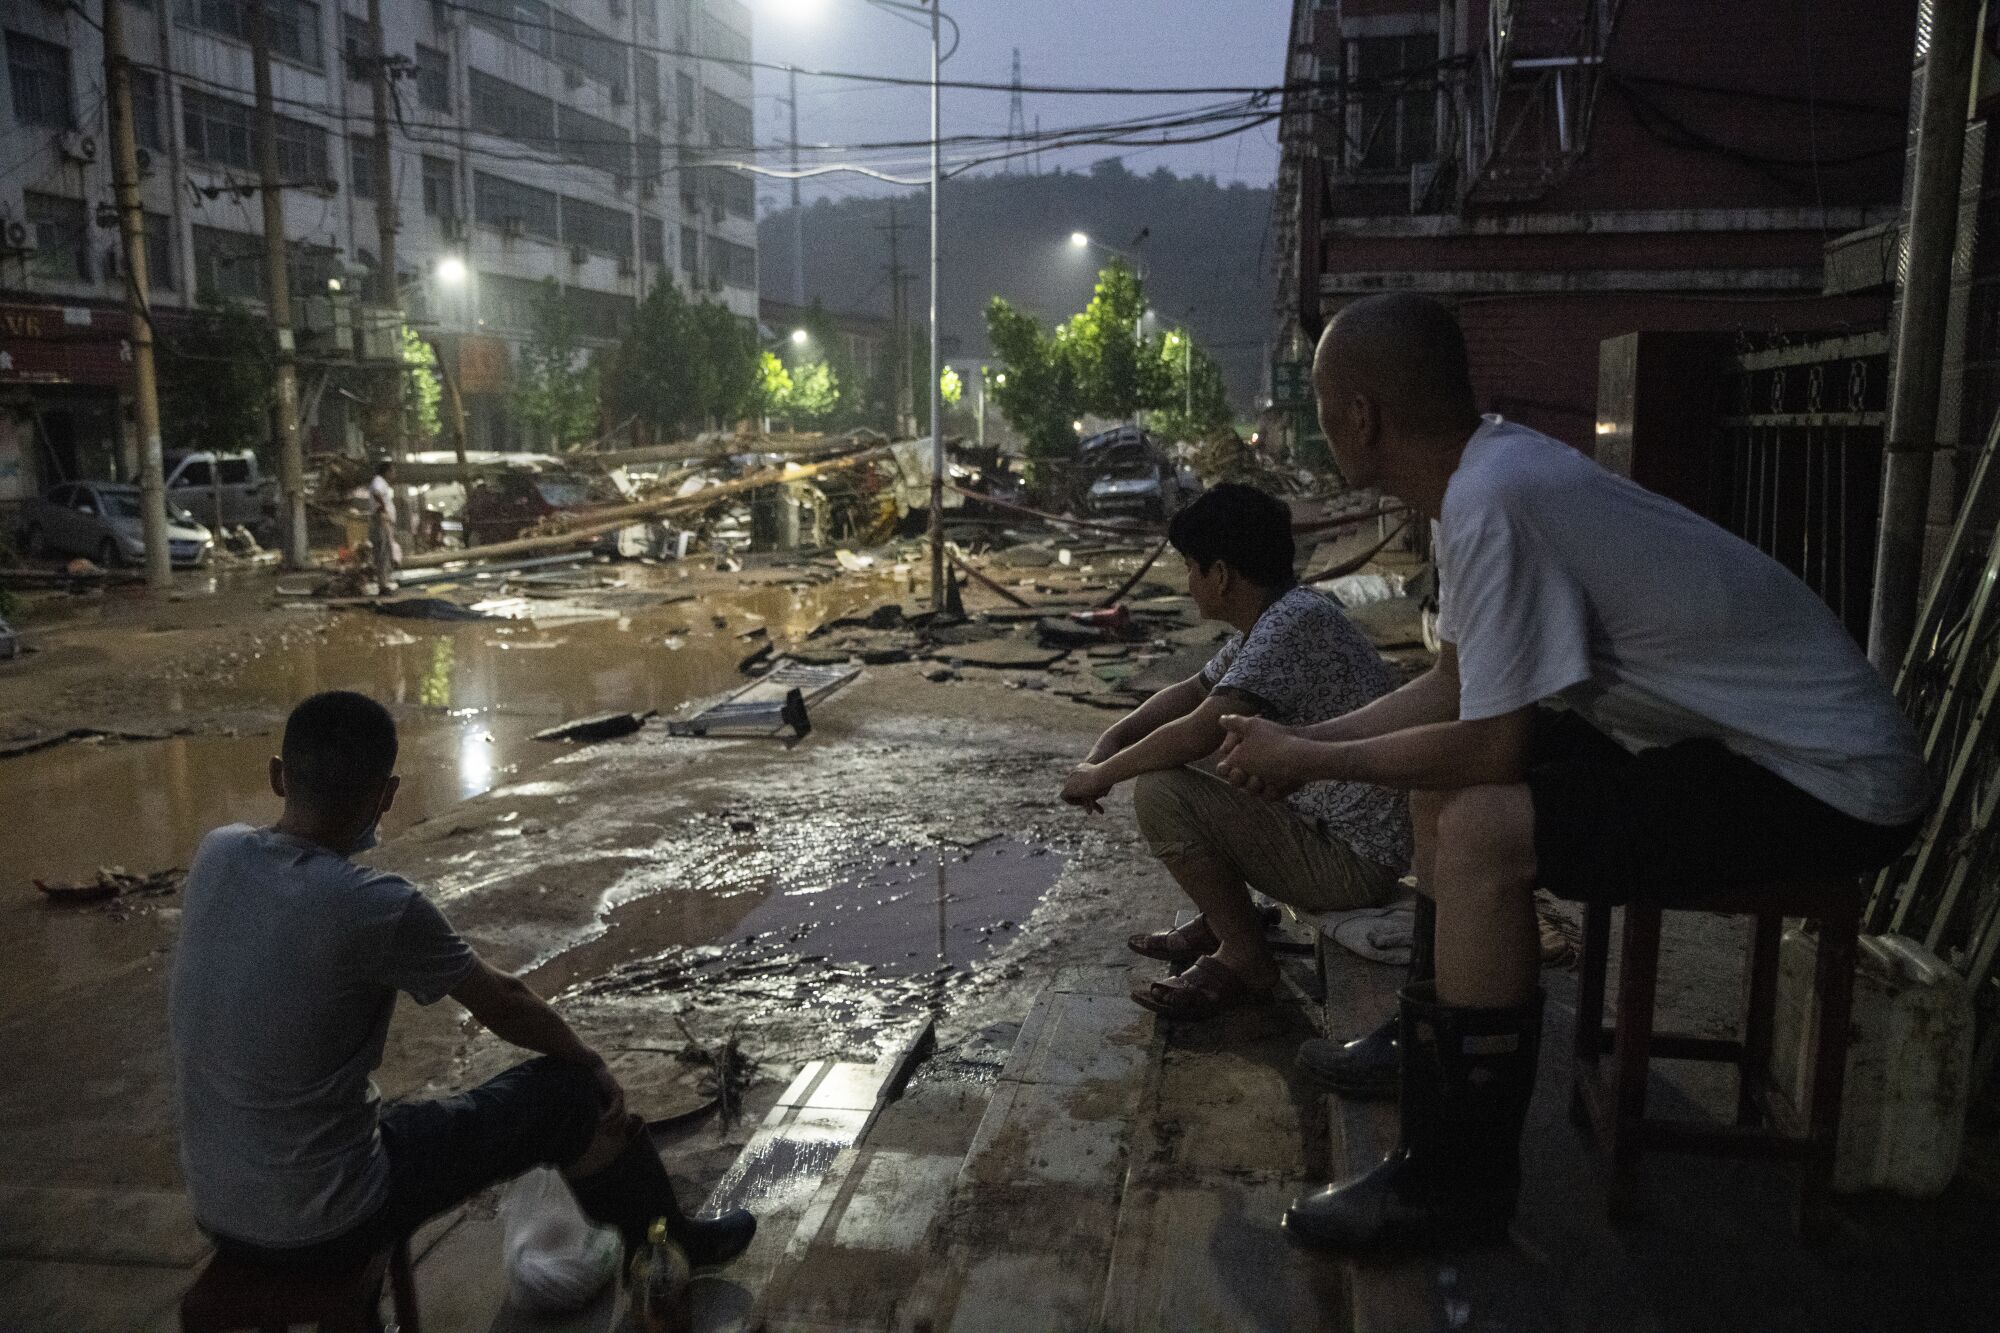 Three people view the flood damage from where they are sitting